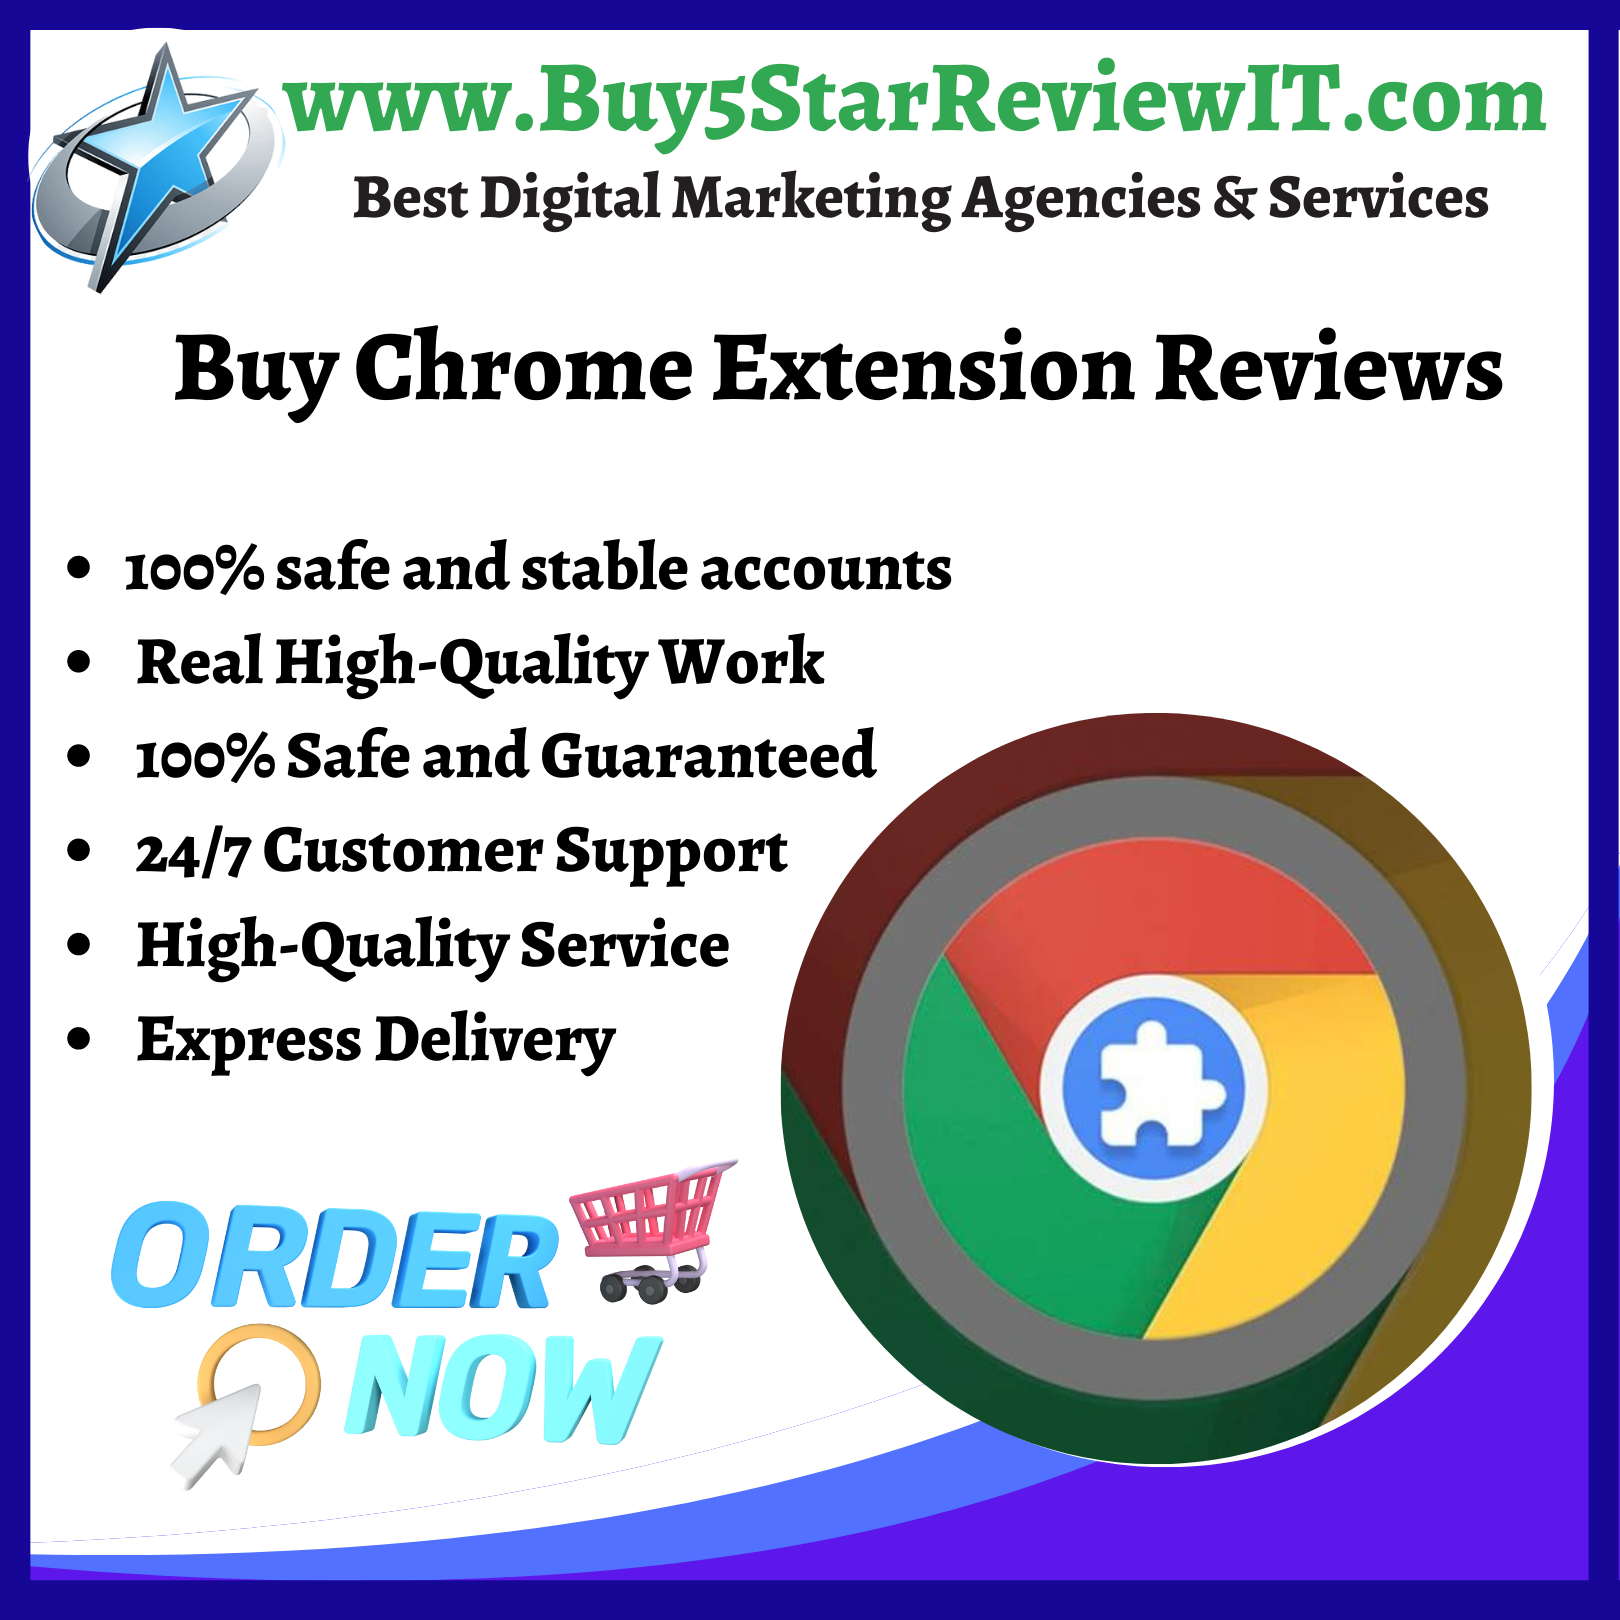 Buy Chrome Extension Reviews - Buy 5 Star Review IT